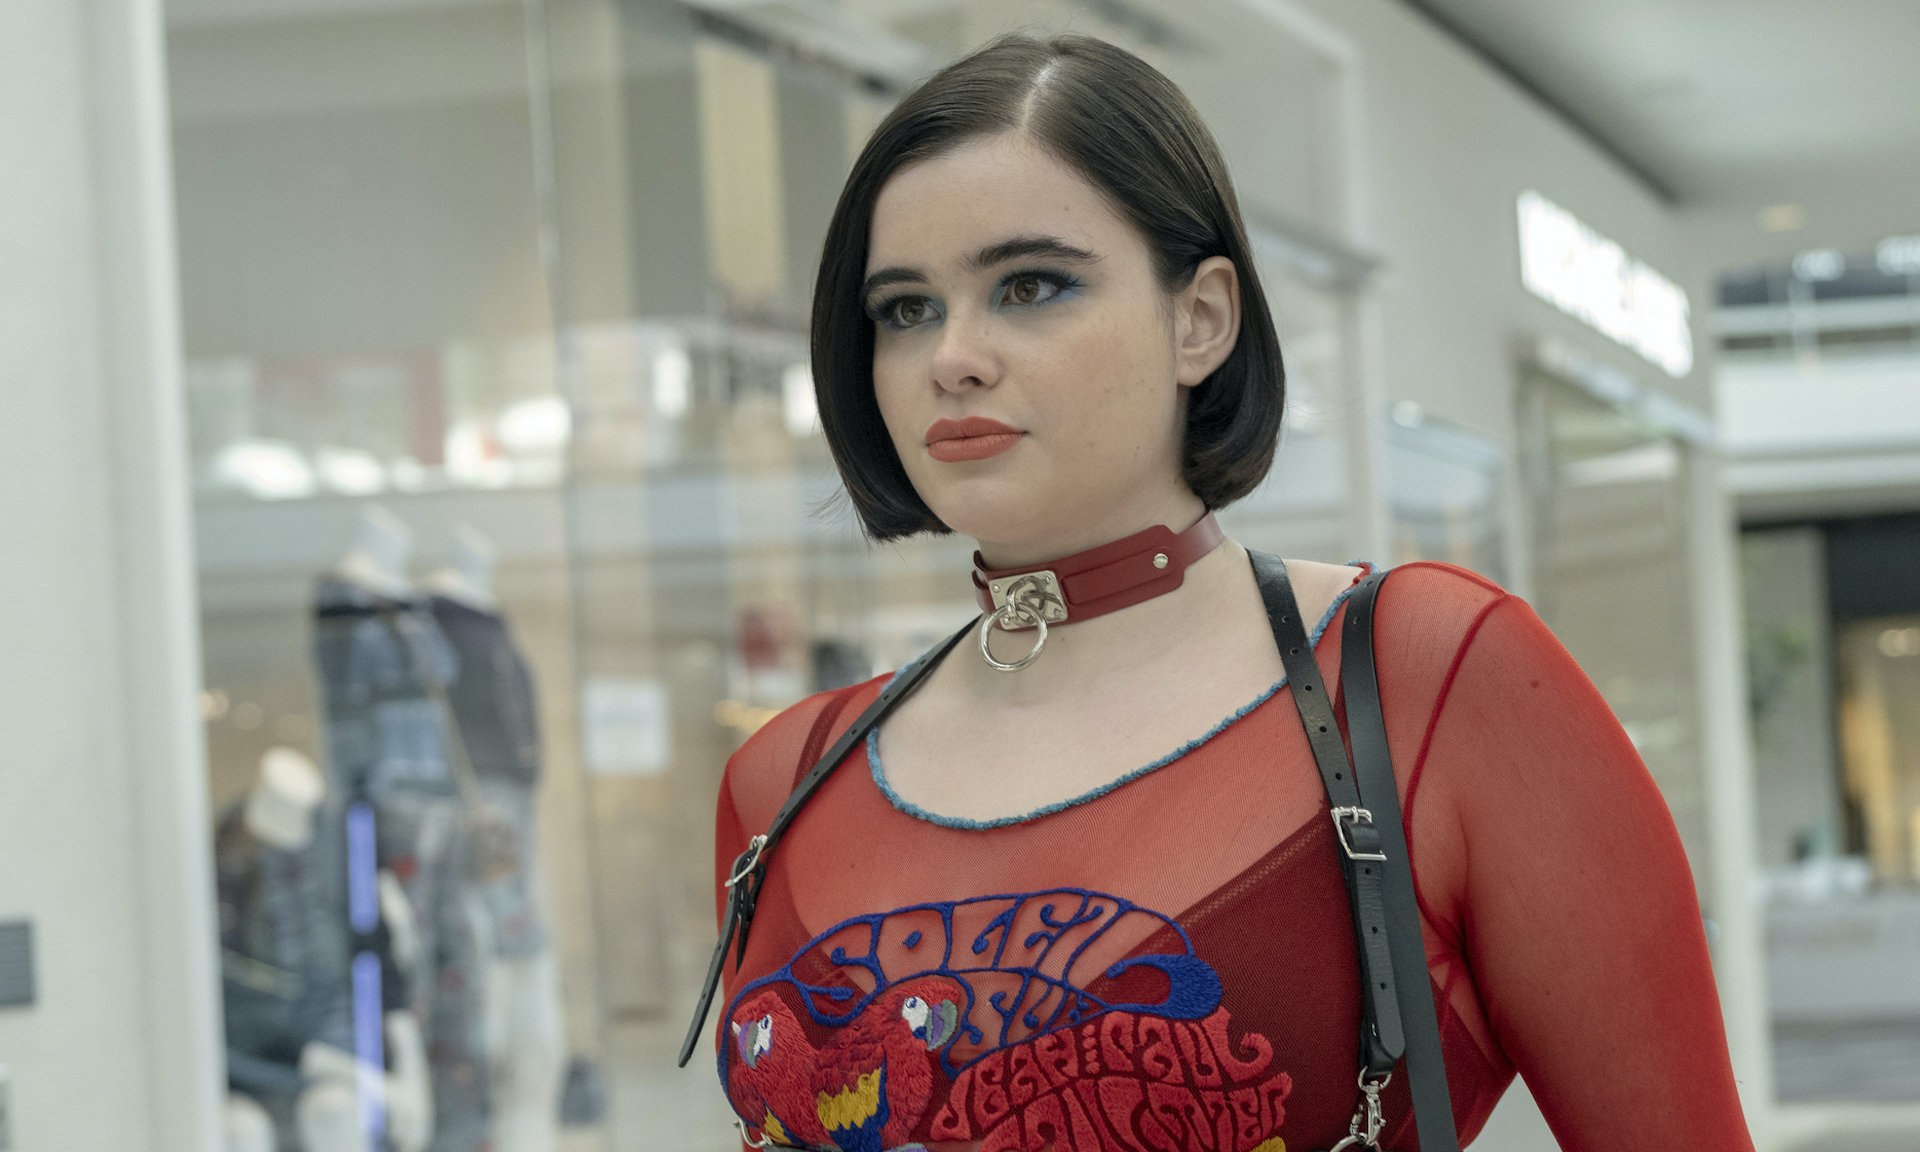 Barbie Ferreira announced that she would not return to Euphoria for its third season. The actress who played the role of Kat Hernandez on the hit show took to Instagram to break the news.